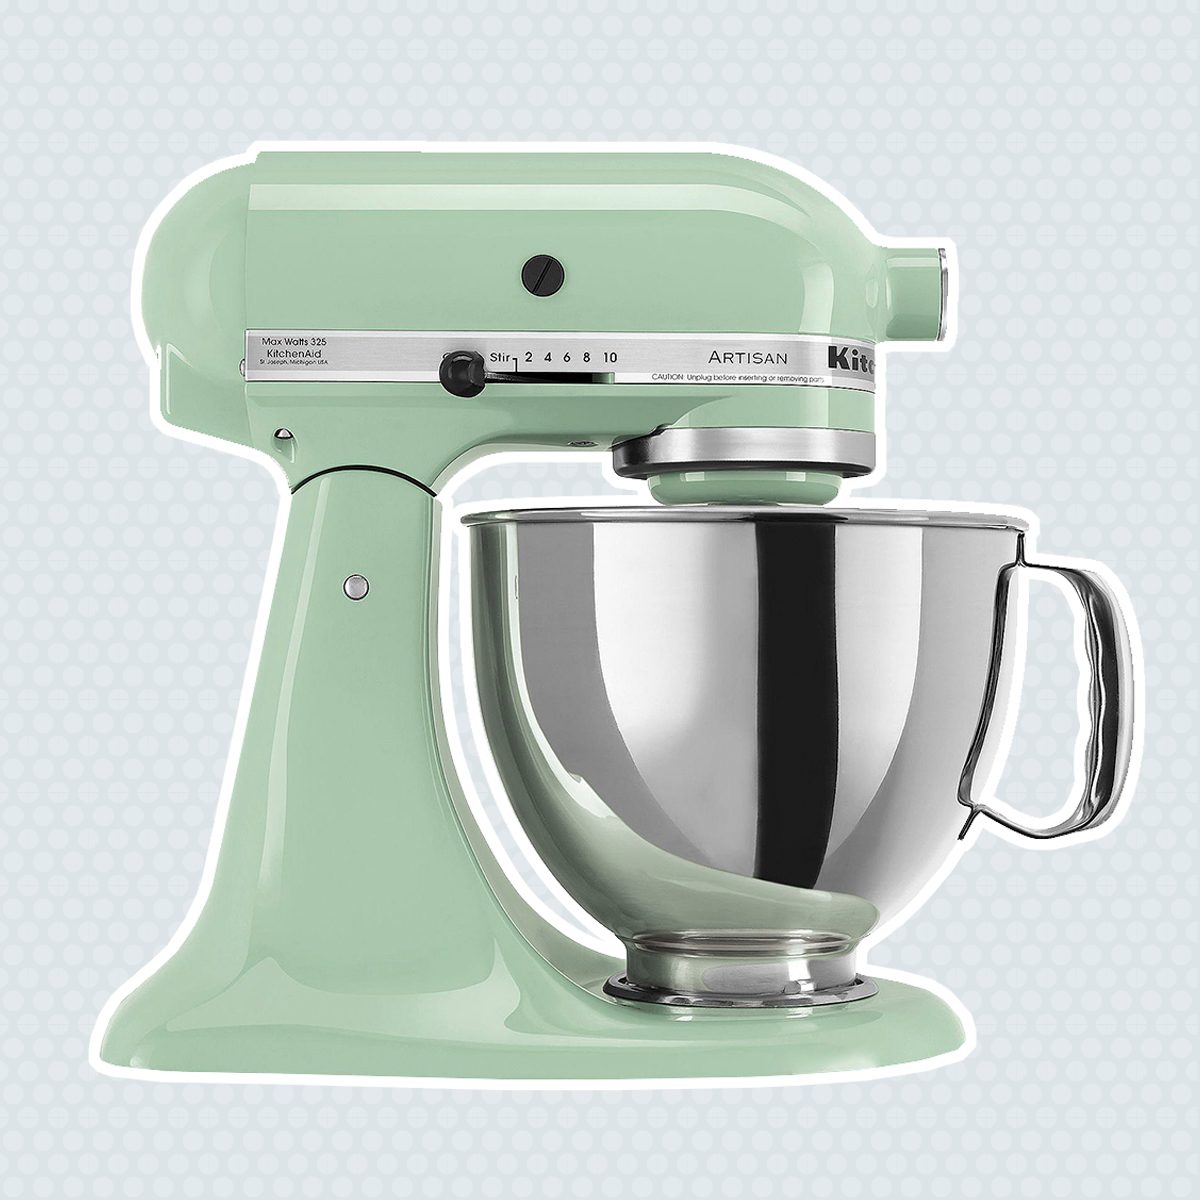 Home Baking Equipment: the BEST baking TOOLS 